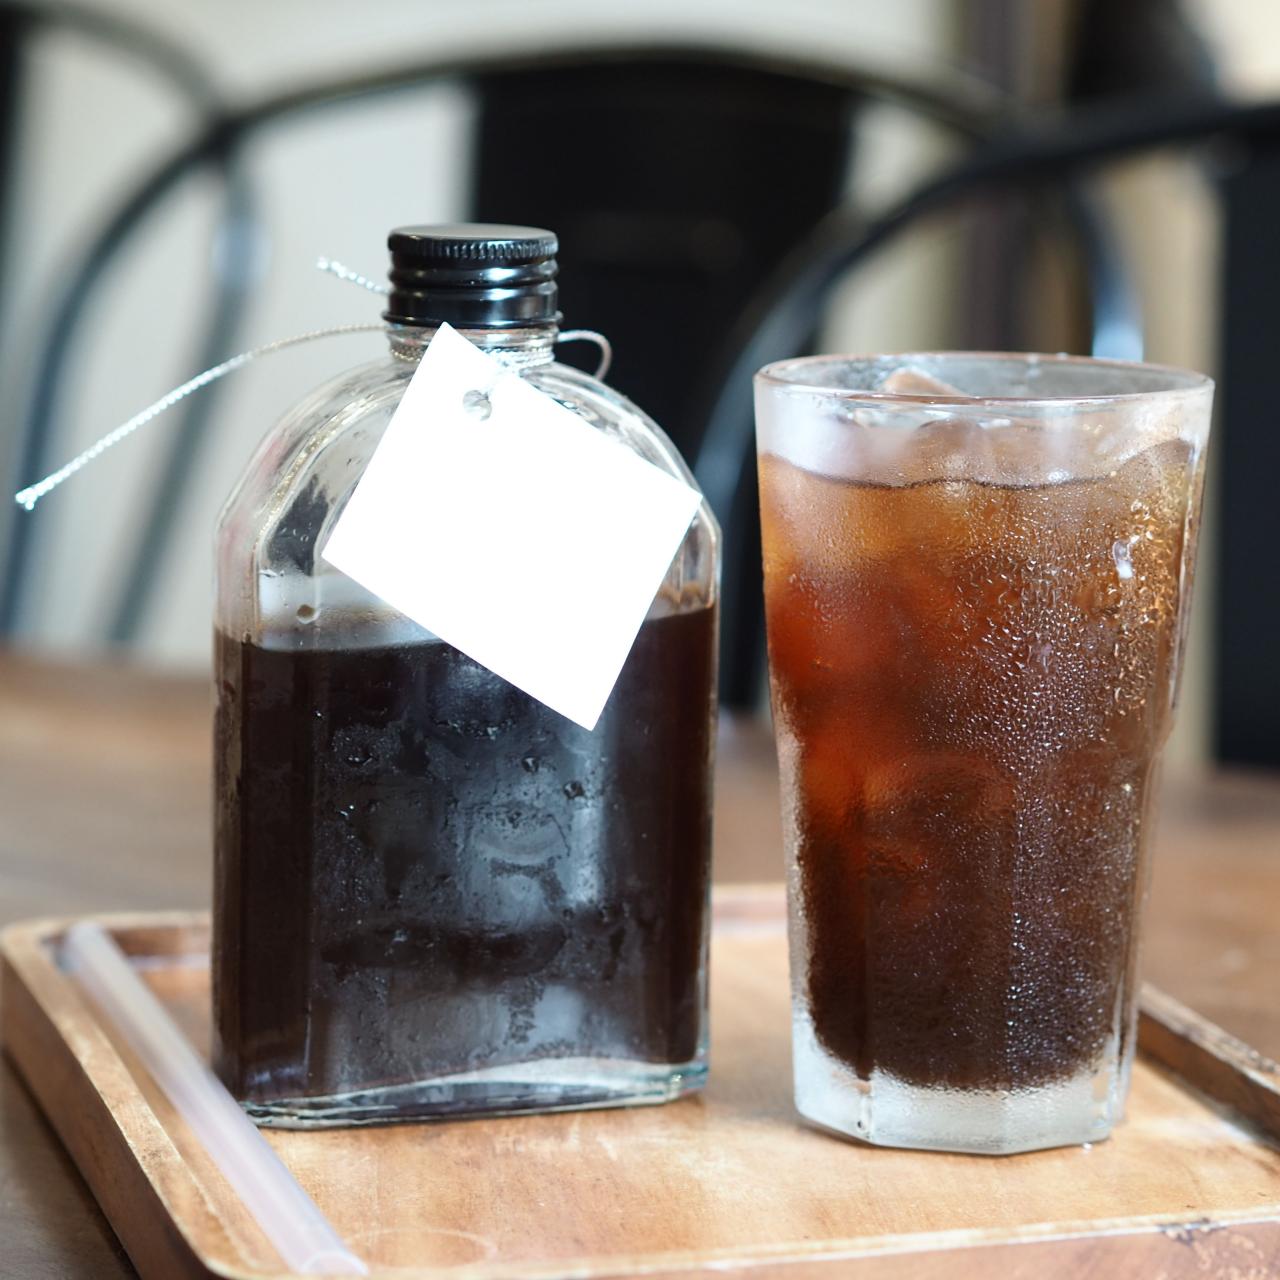 hanger Uitgaand Ver weg How to Make Cold Brew Coffee Step-by-Step | Cooking School | Food Network